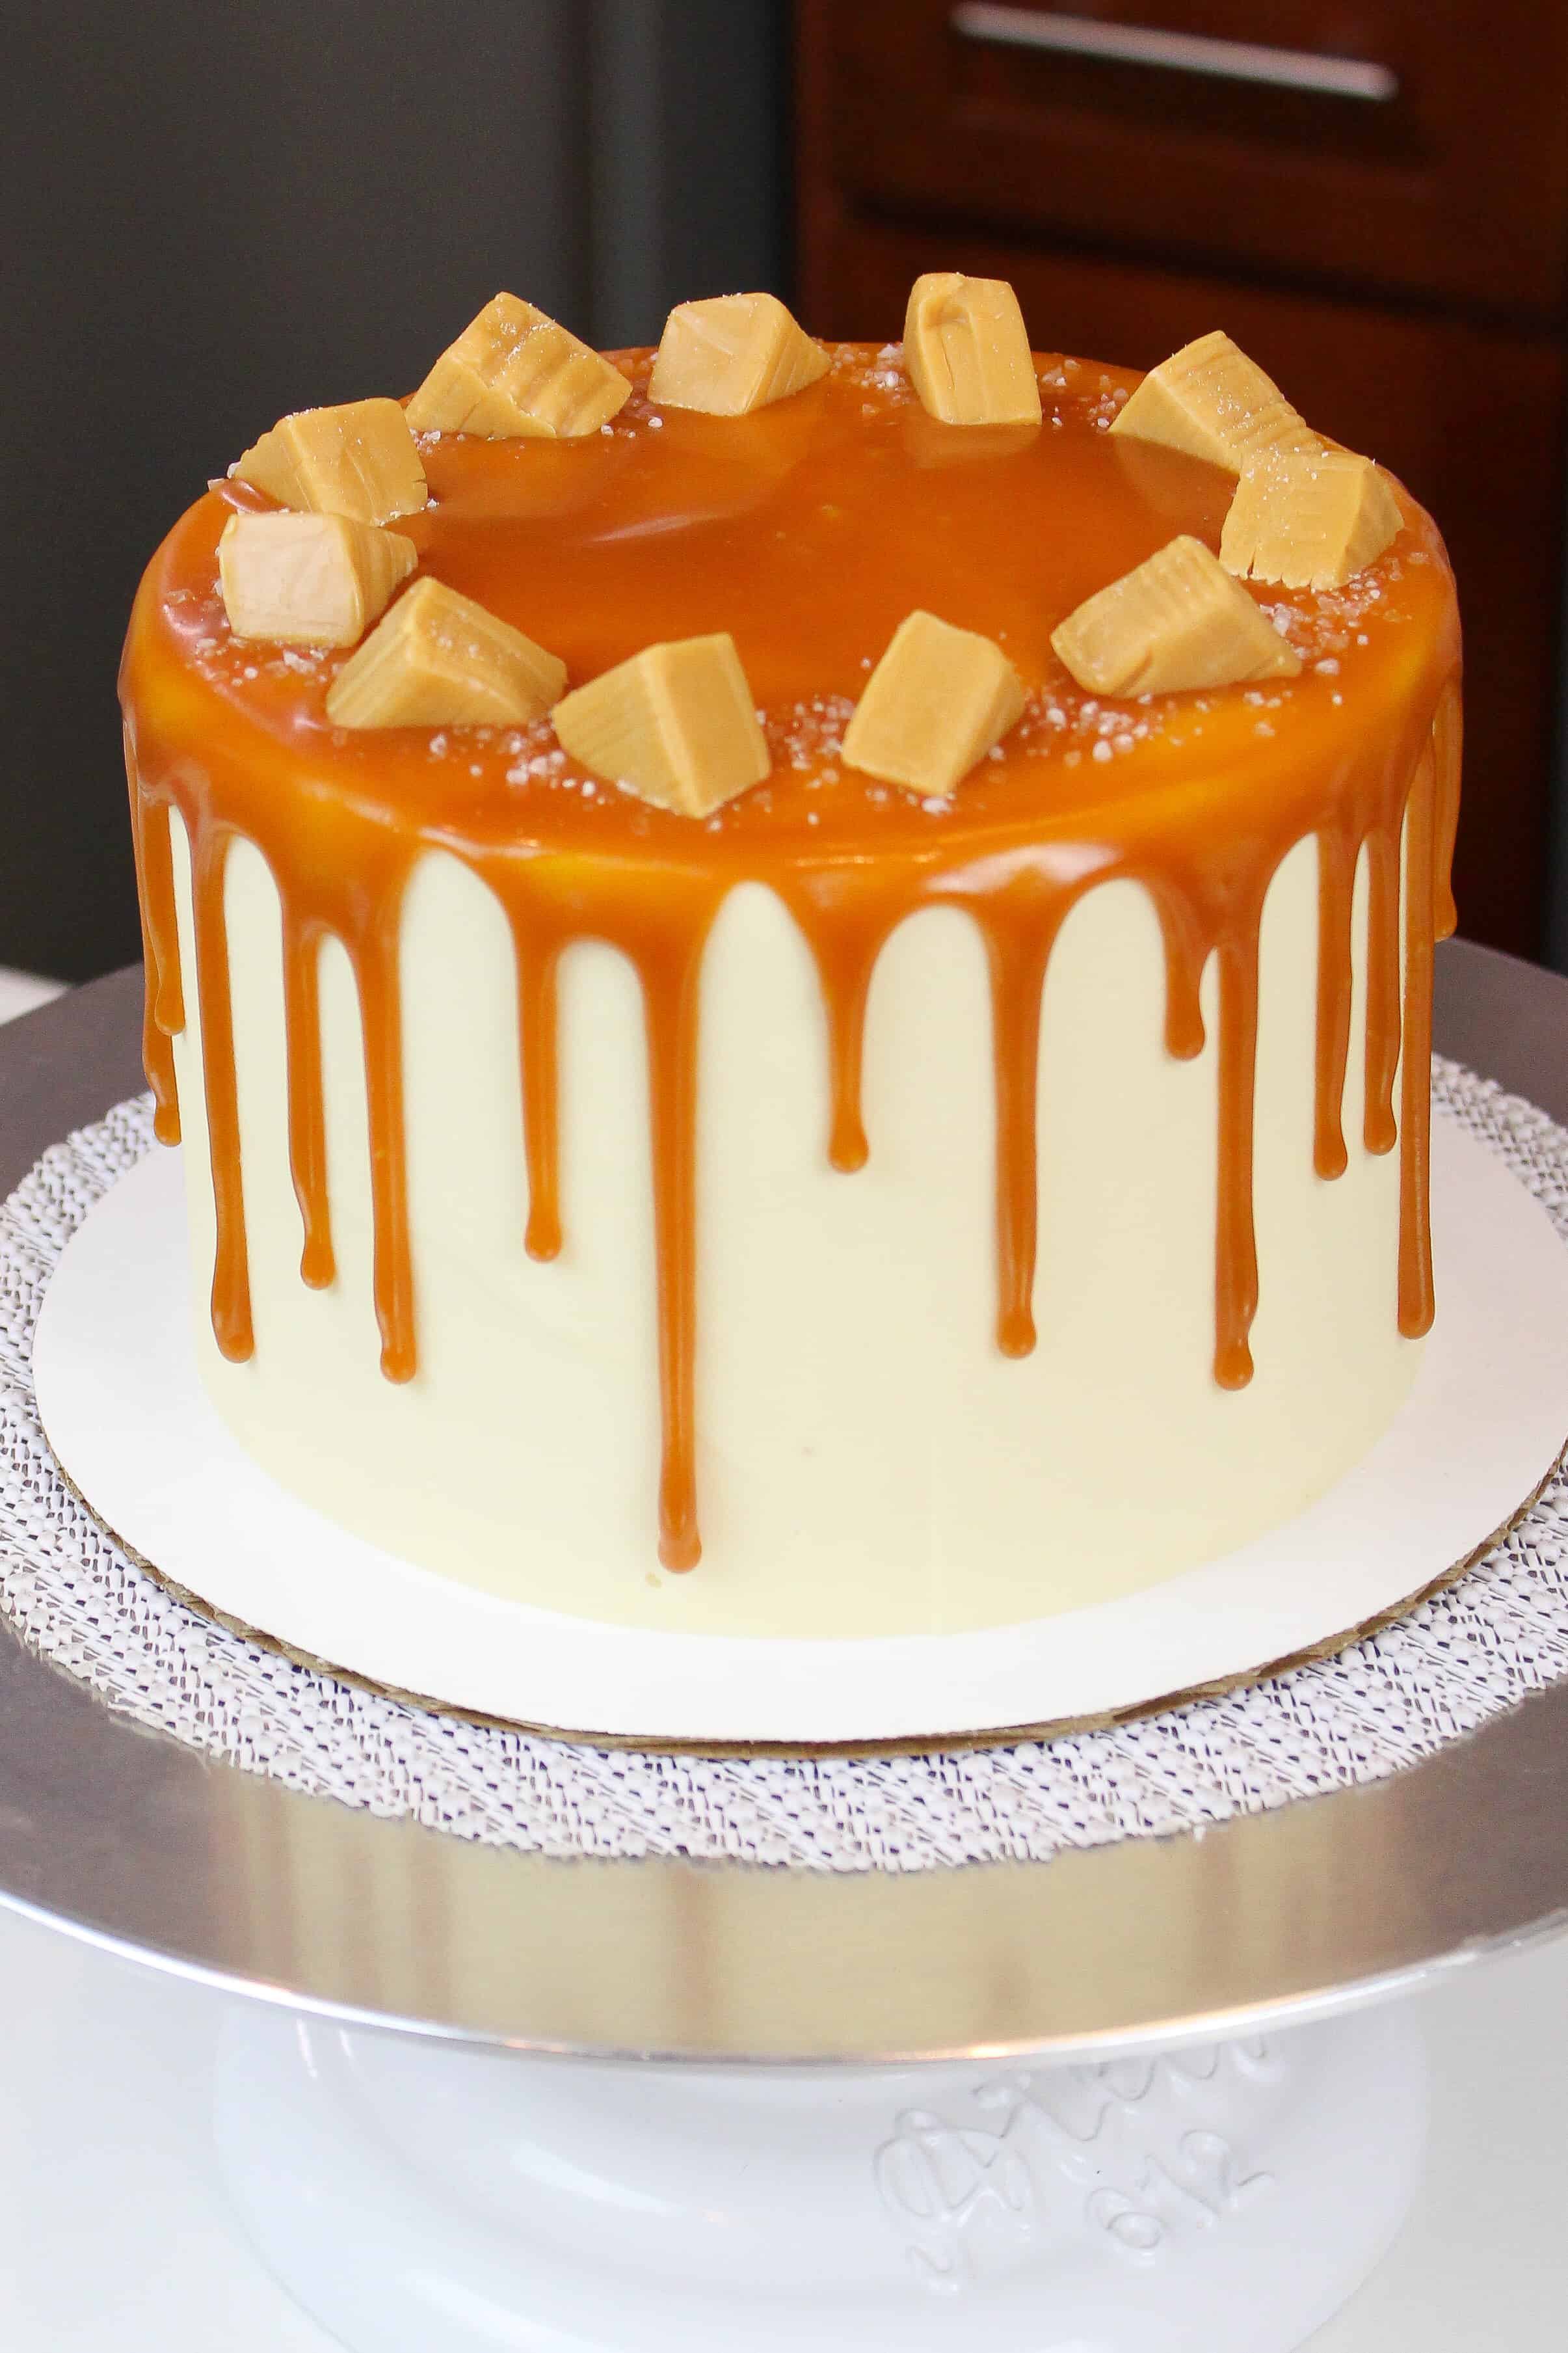 Salted Caramel Layer Cake Delicious From Scratch Recipe